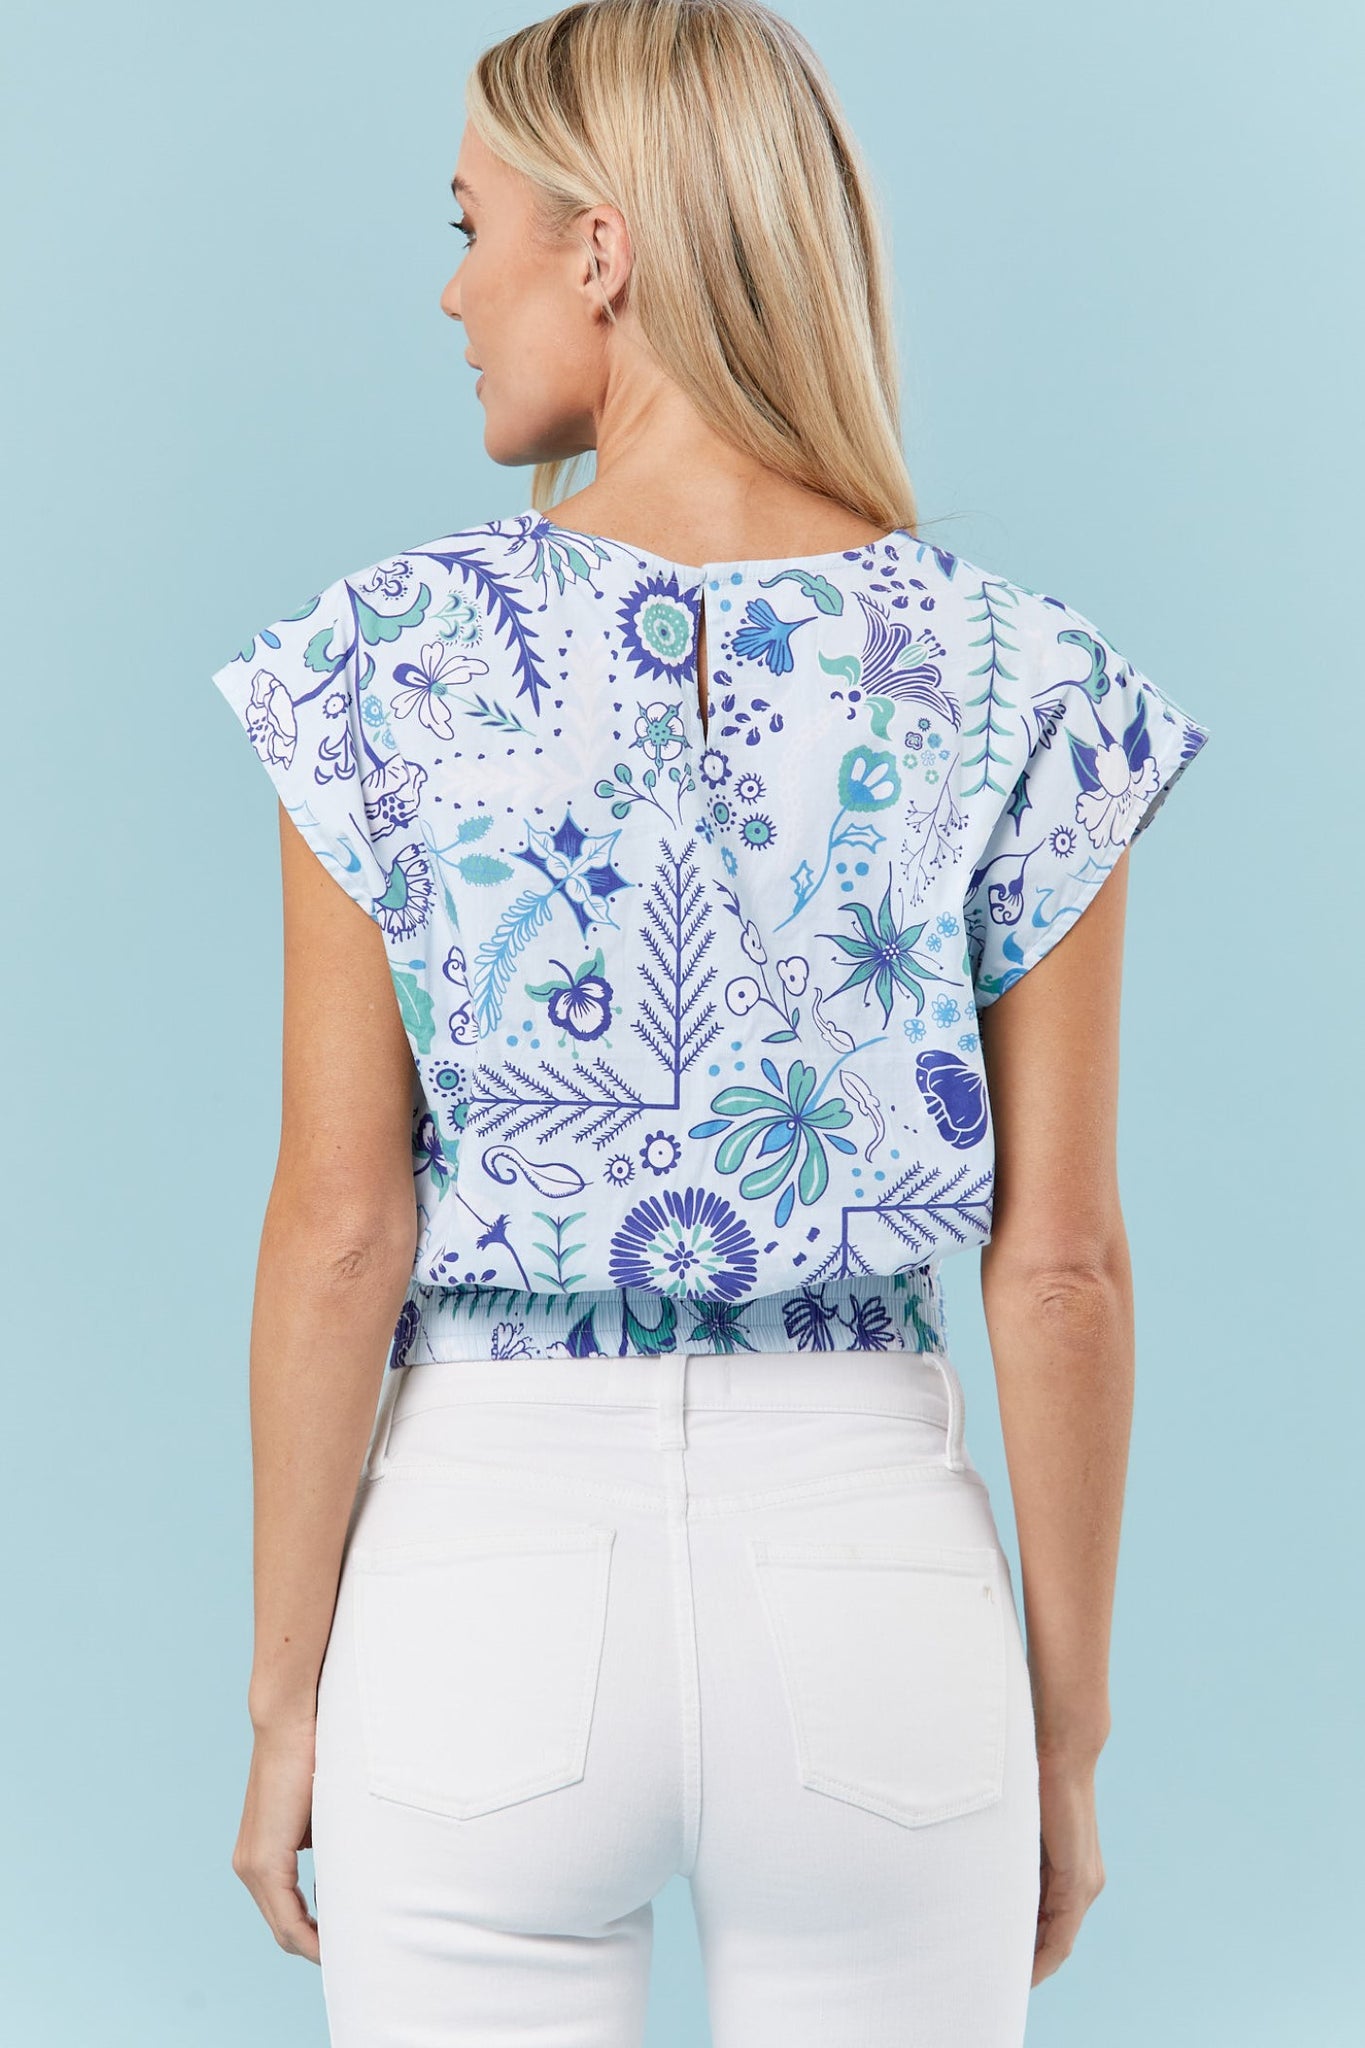 Gardenia Blouse in Soft Blue Floral